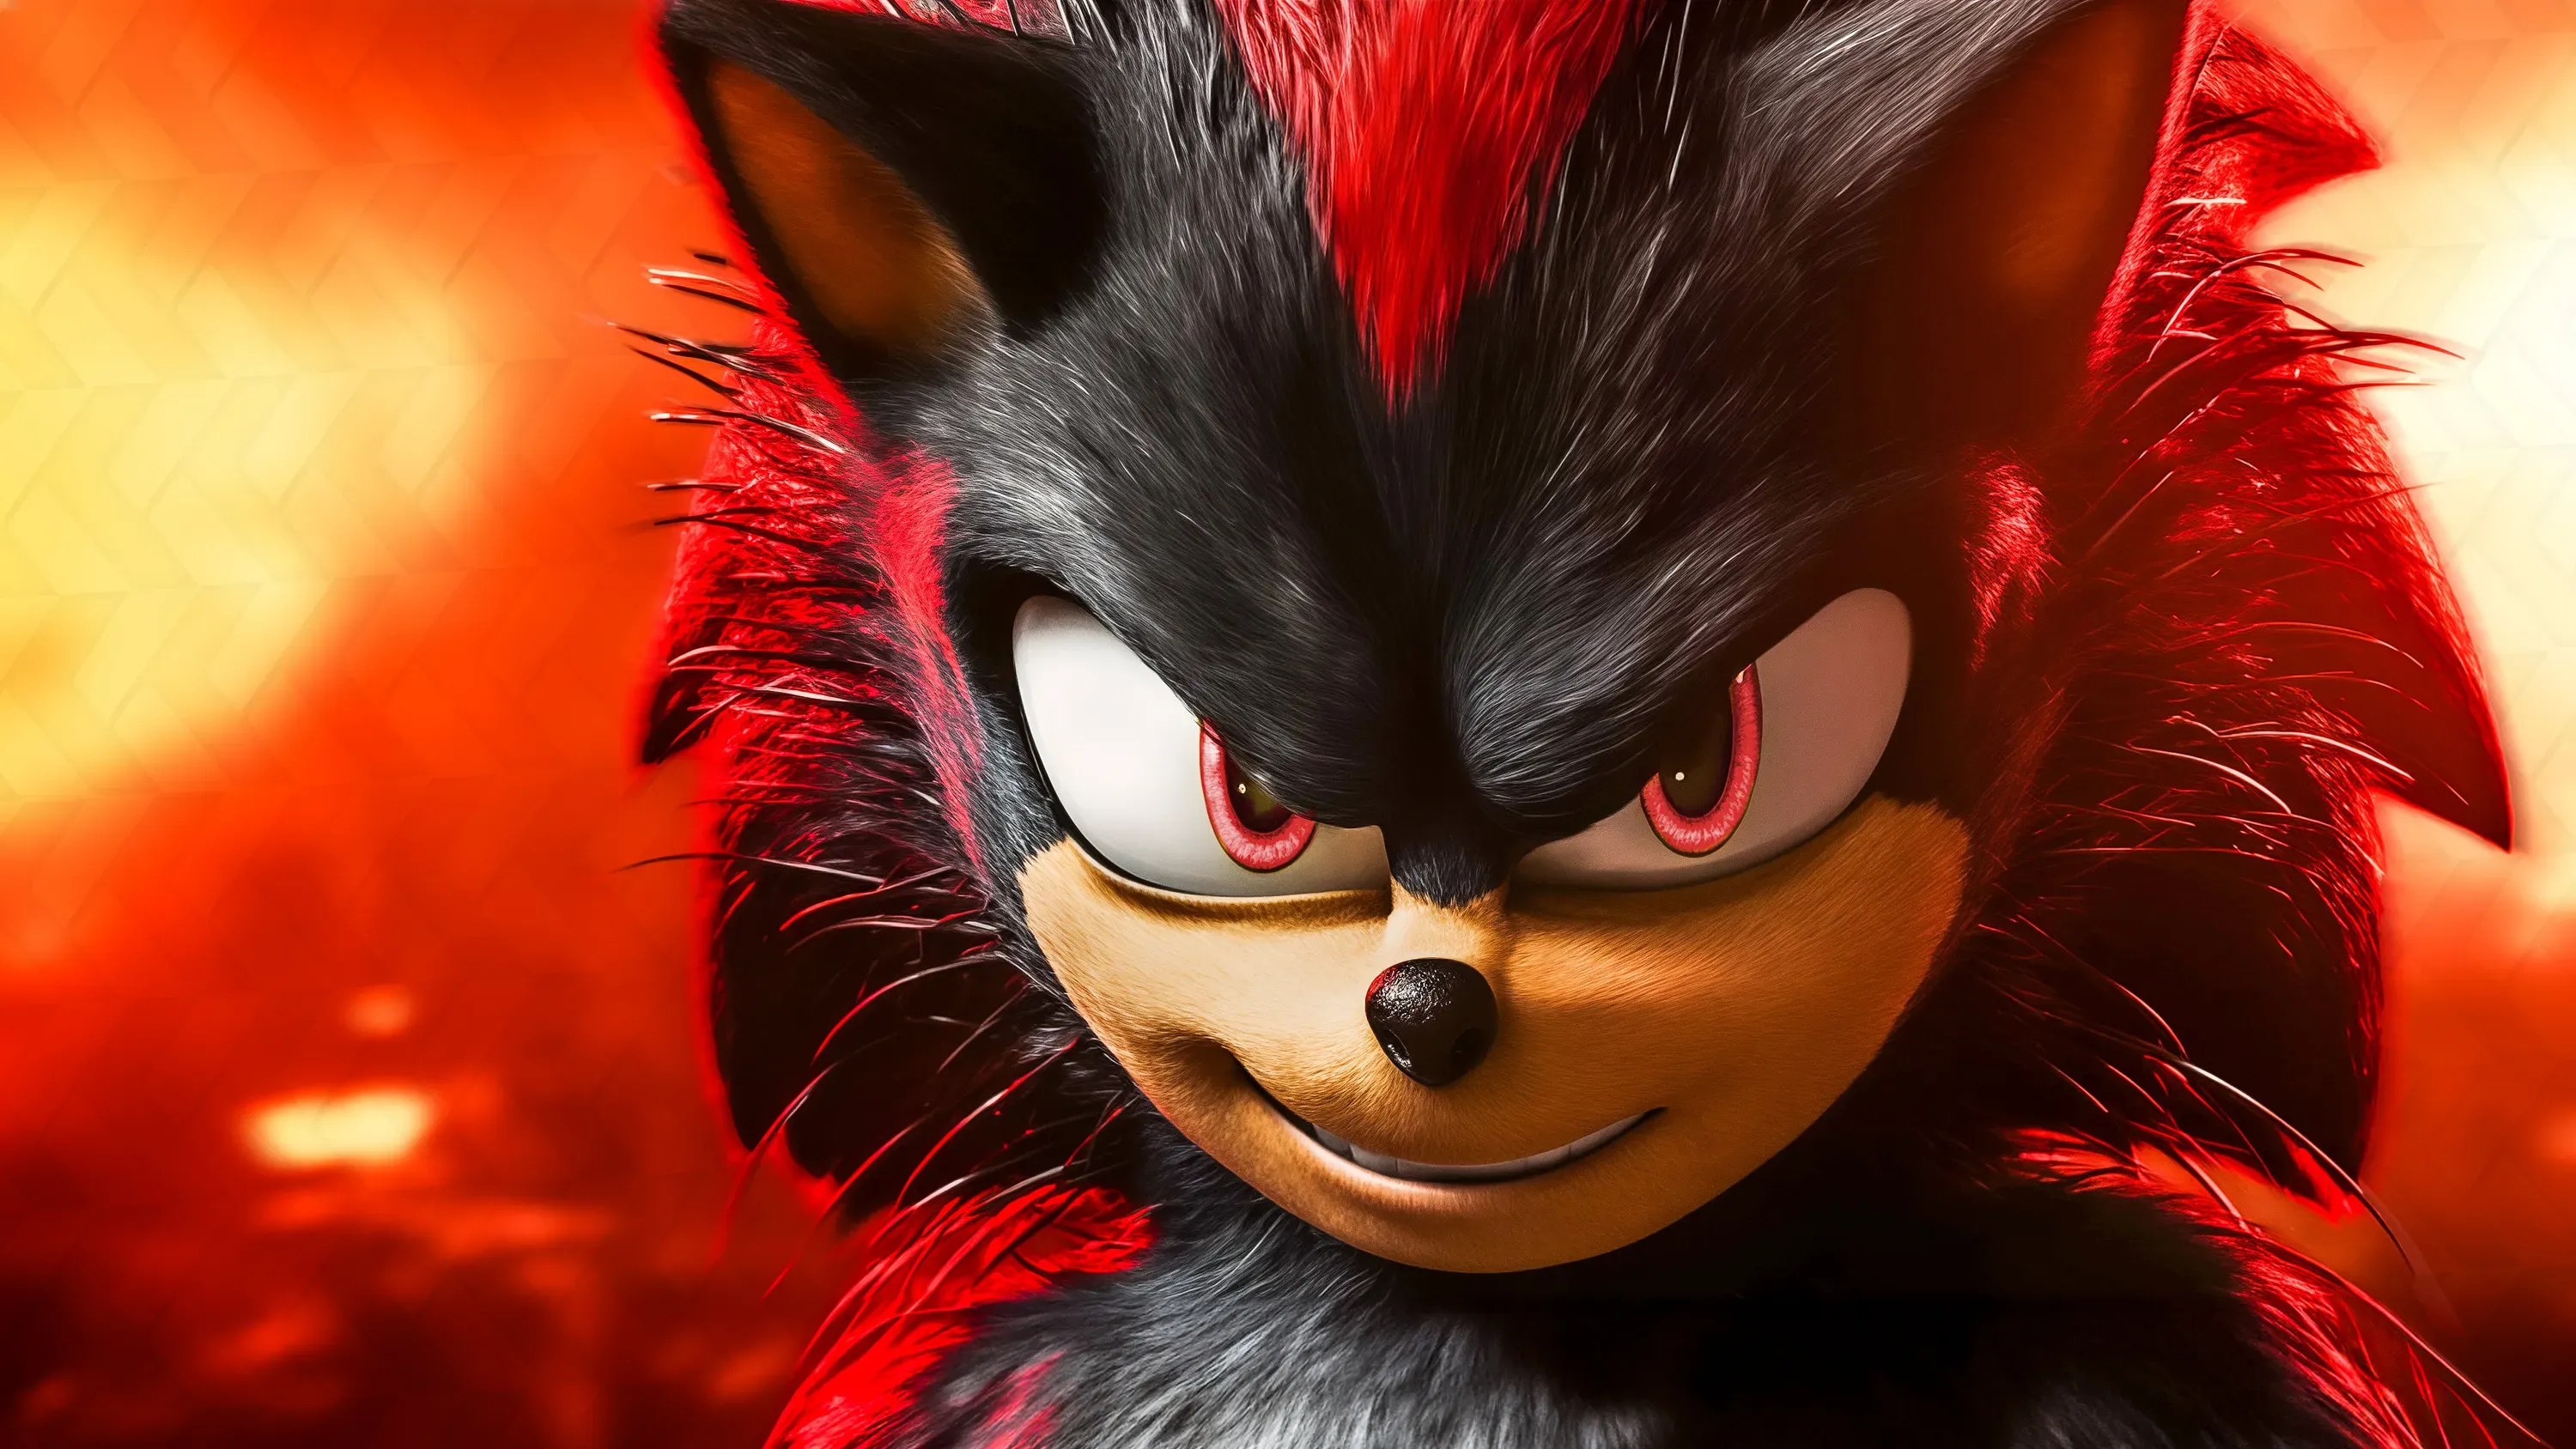 Sonic the Hedgehog 3: New Trailer Breakdown, Release Date, Cast and More Shadow